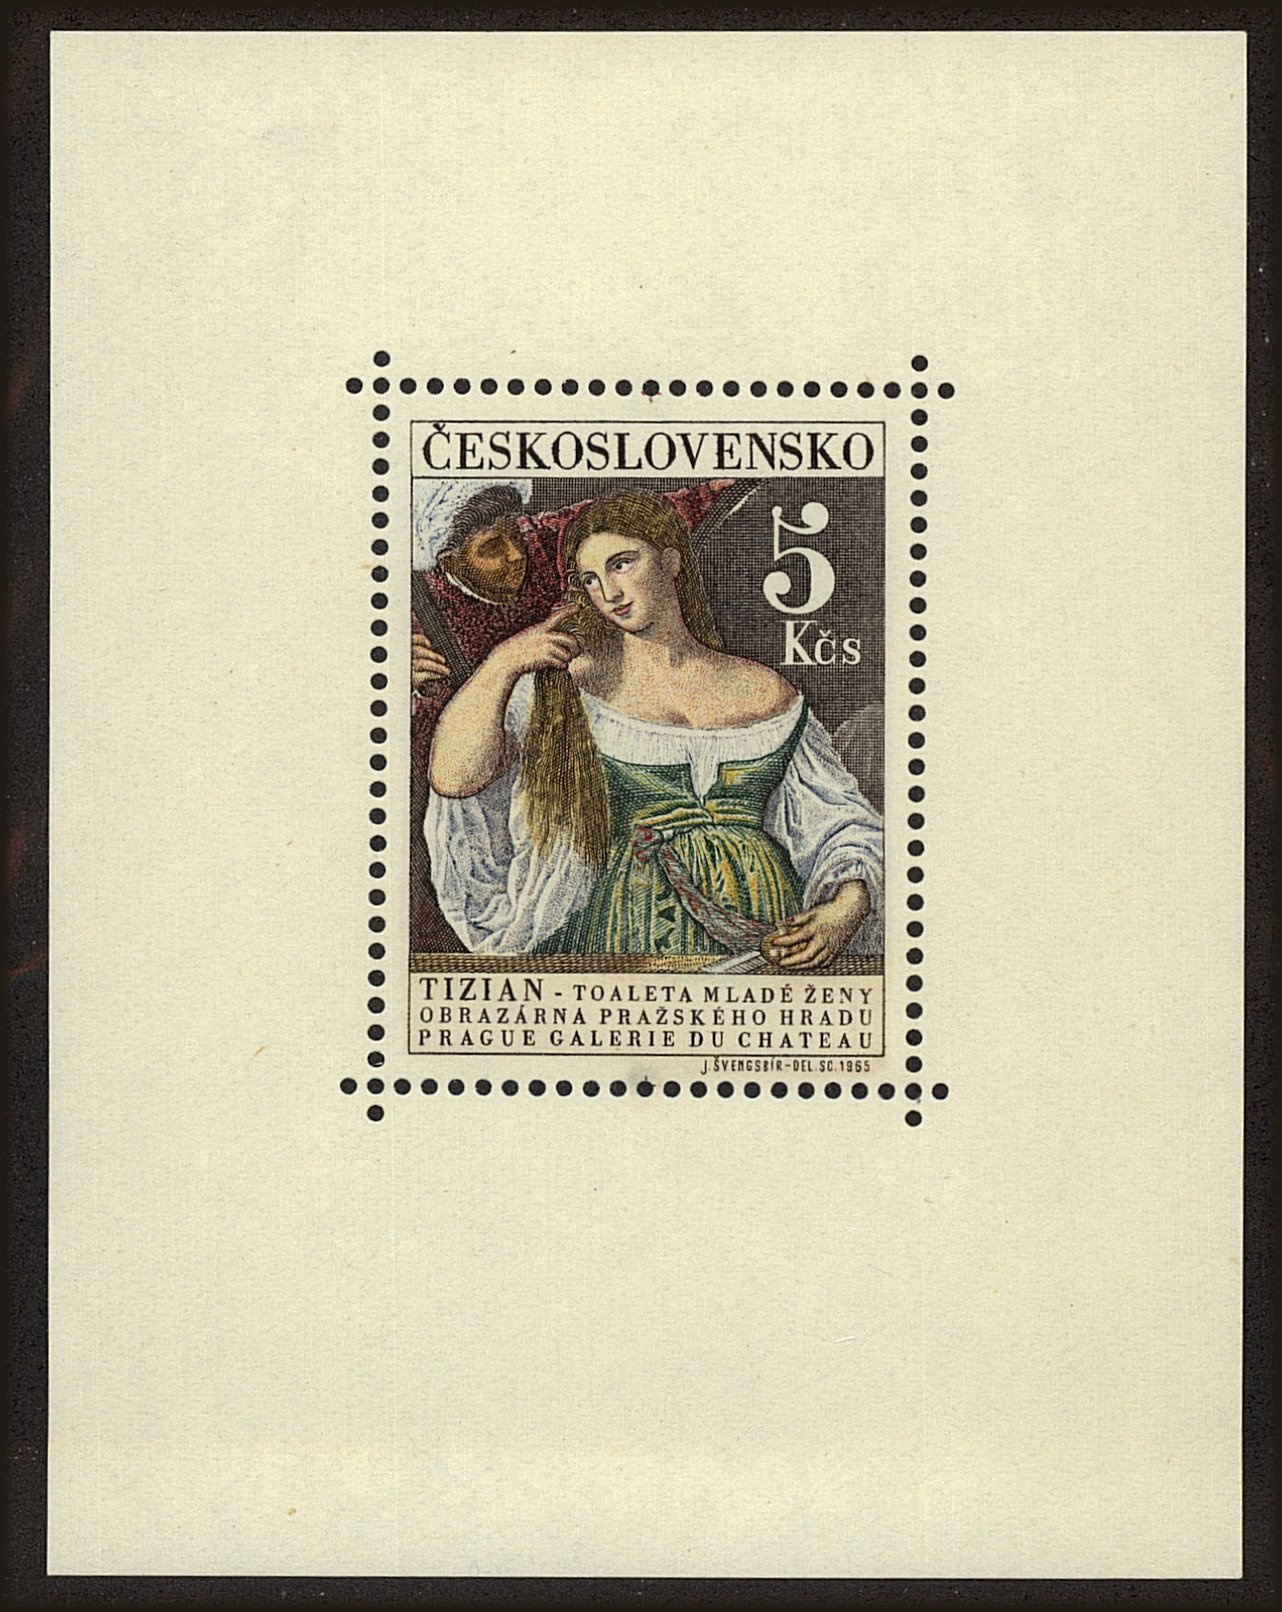 Front view of Czechia 1336 collectors stamp